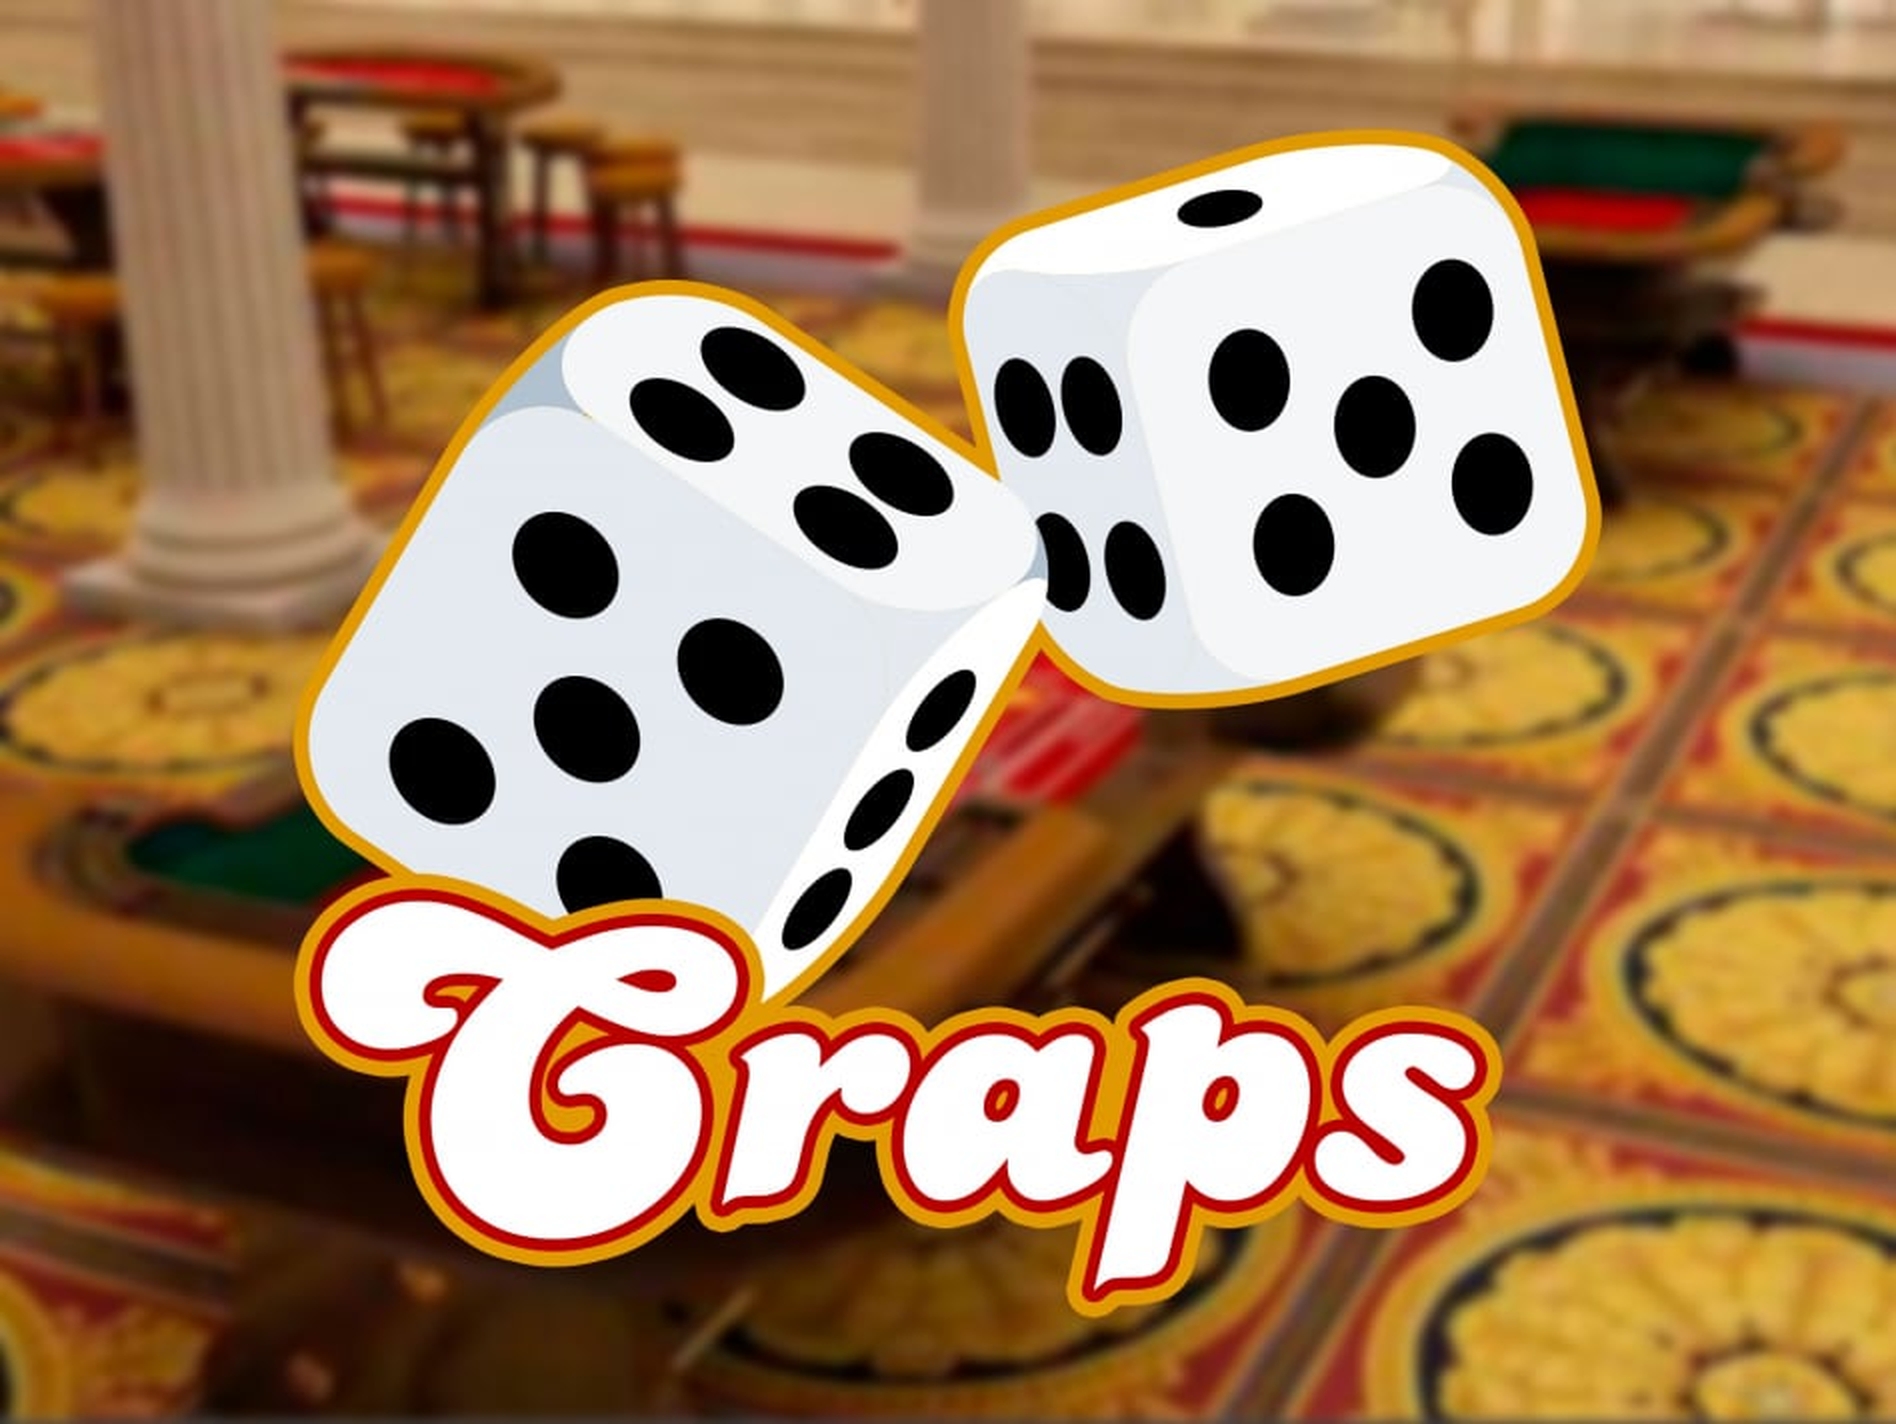 The Craps Online Slot Demo Game by 1x2 Gaming